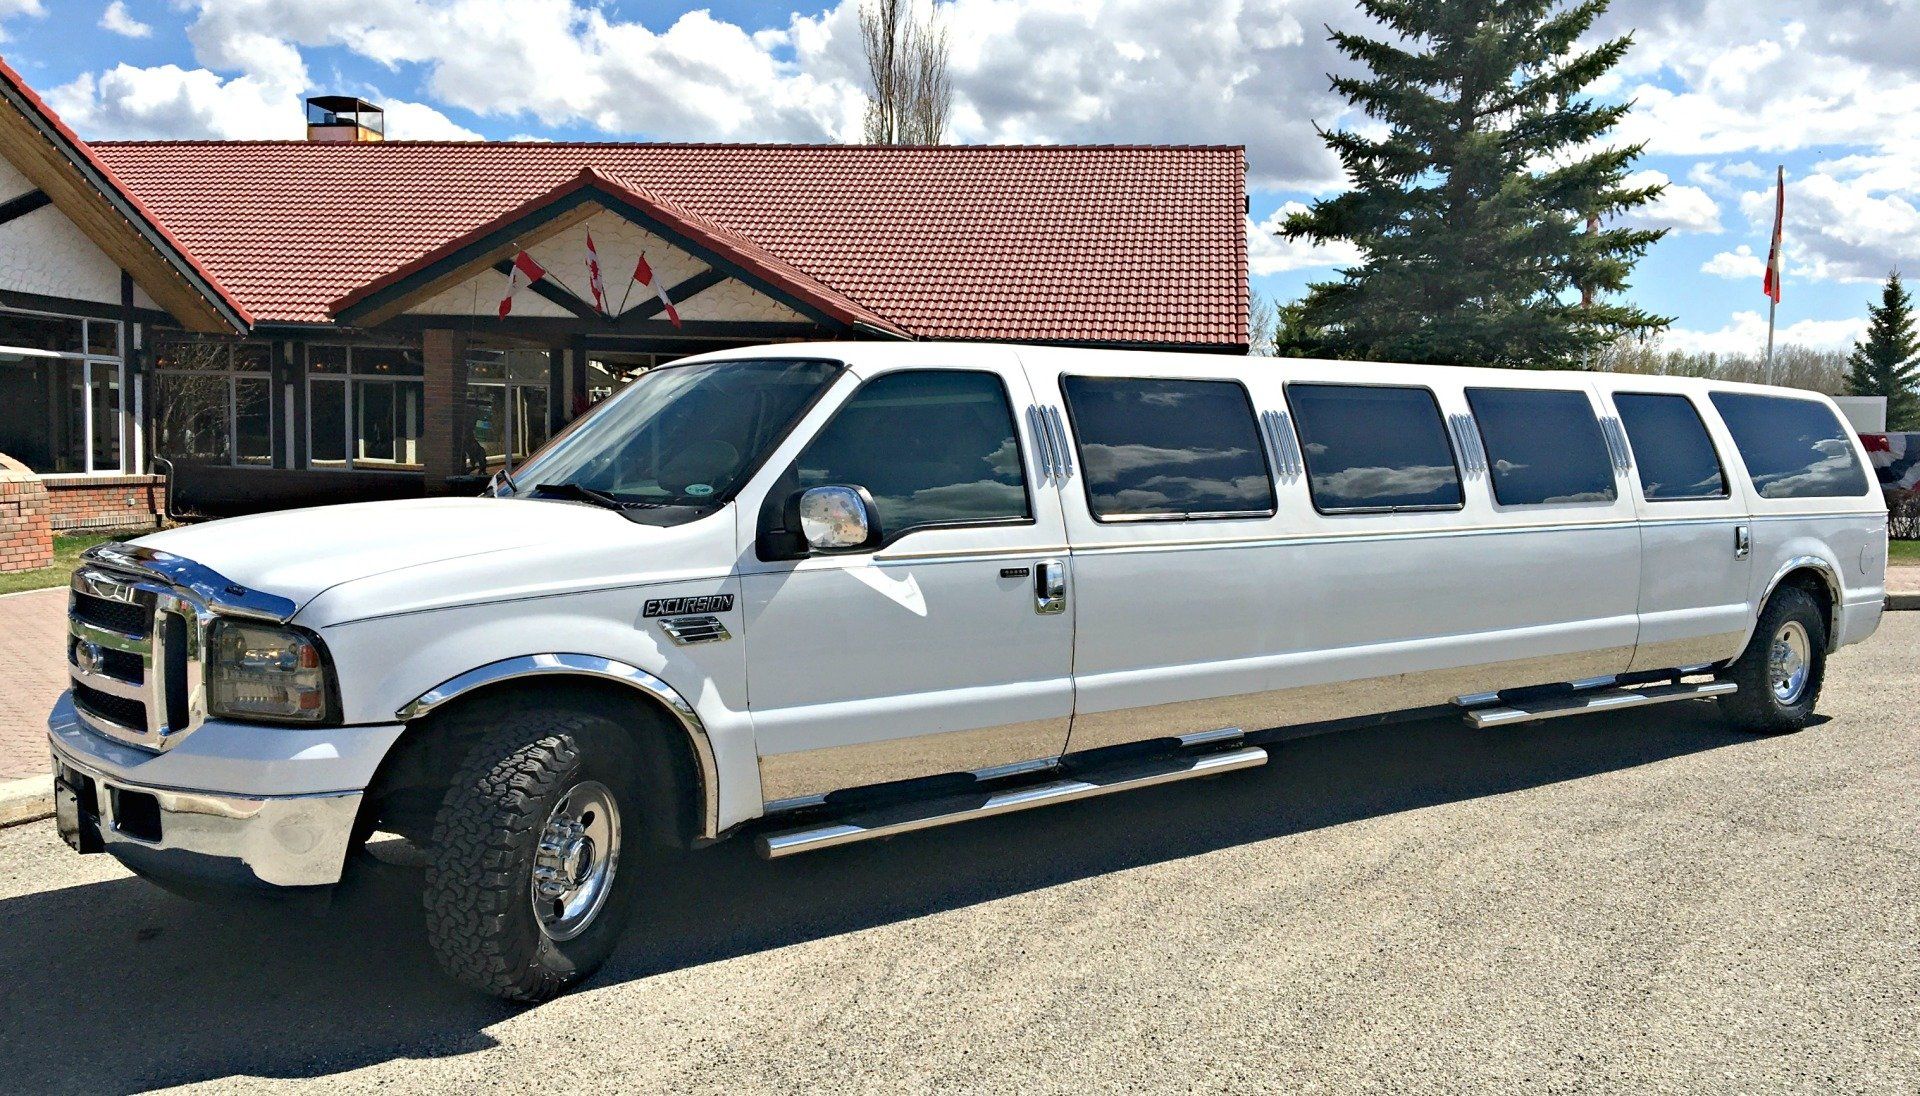 Limo To go white-excursion-stretch-suv-limo-side-exterior-view